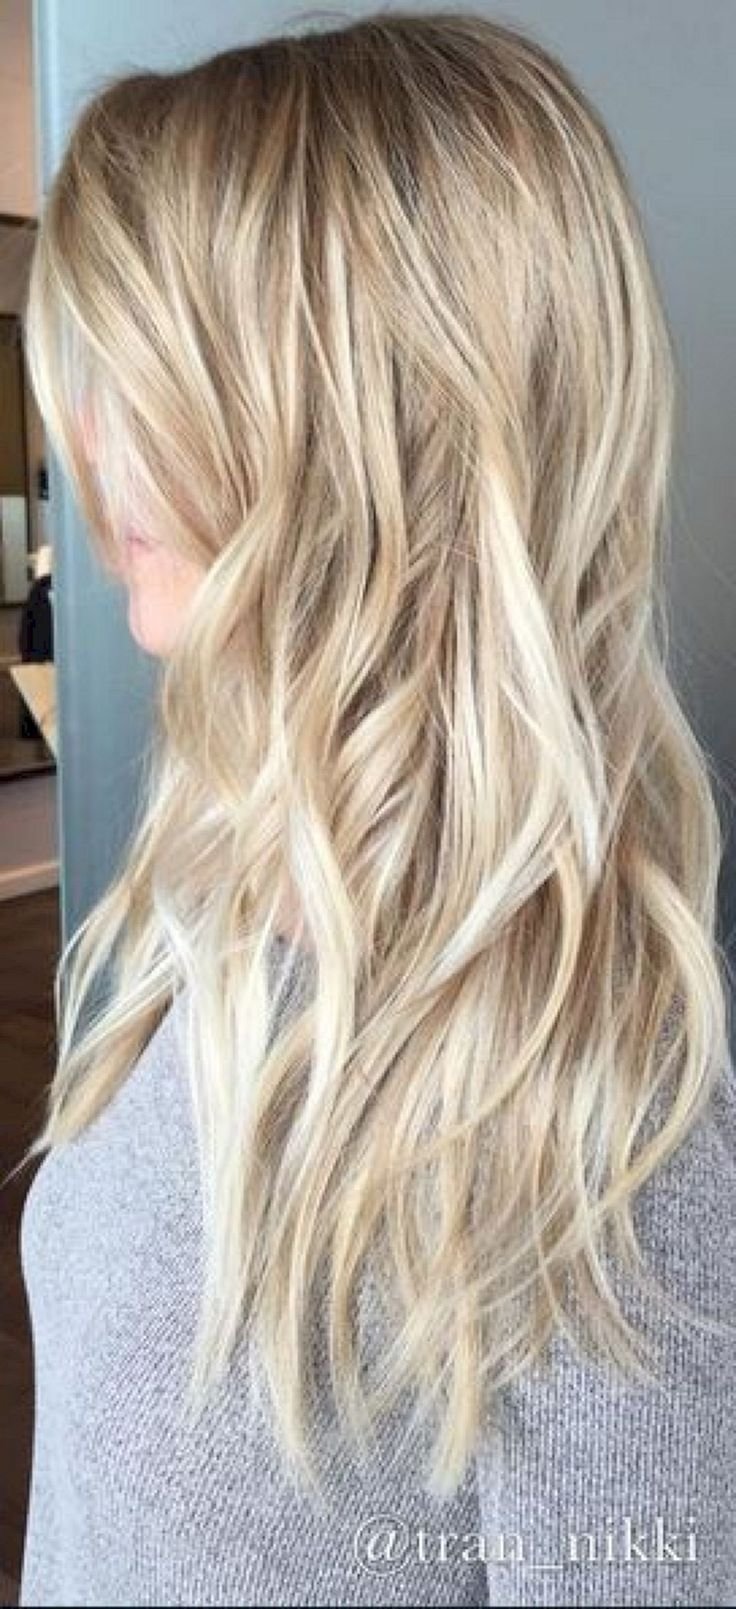 10 Great Hair Color Ideas For Blondes 101 best blonde hair color images on pinterest ash blonde hair 2022